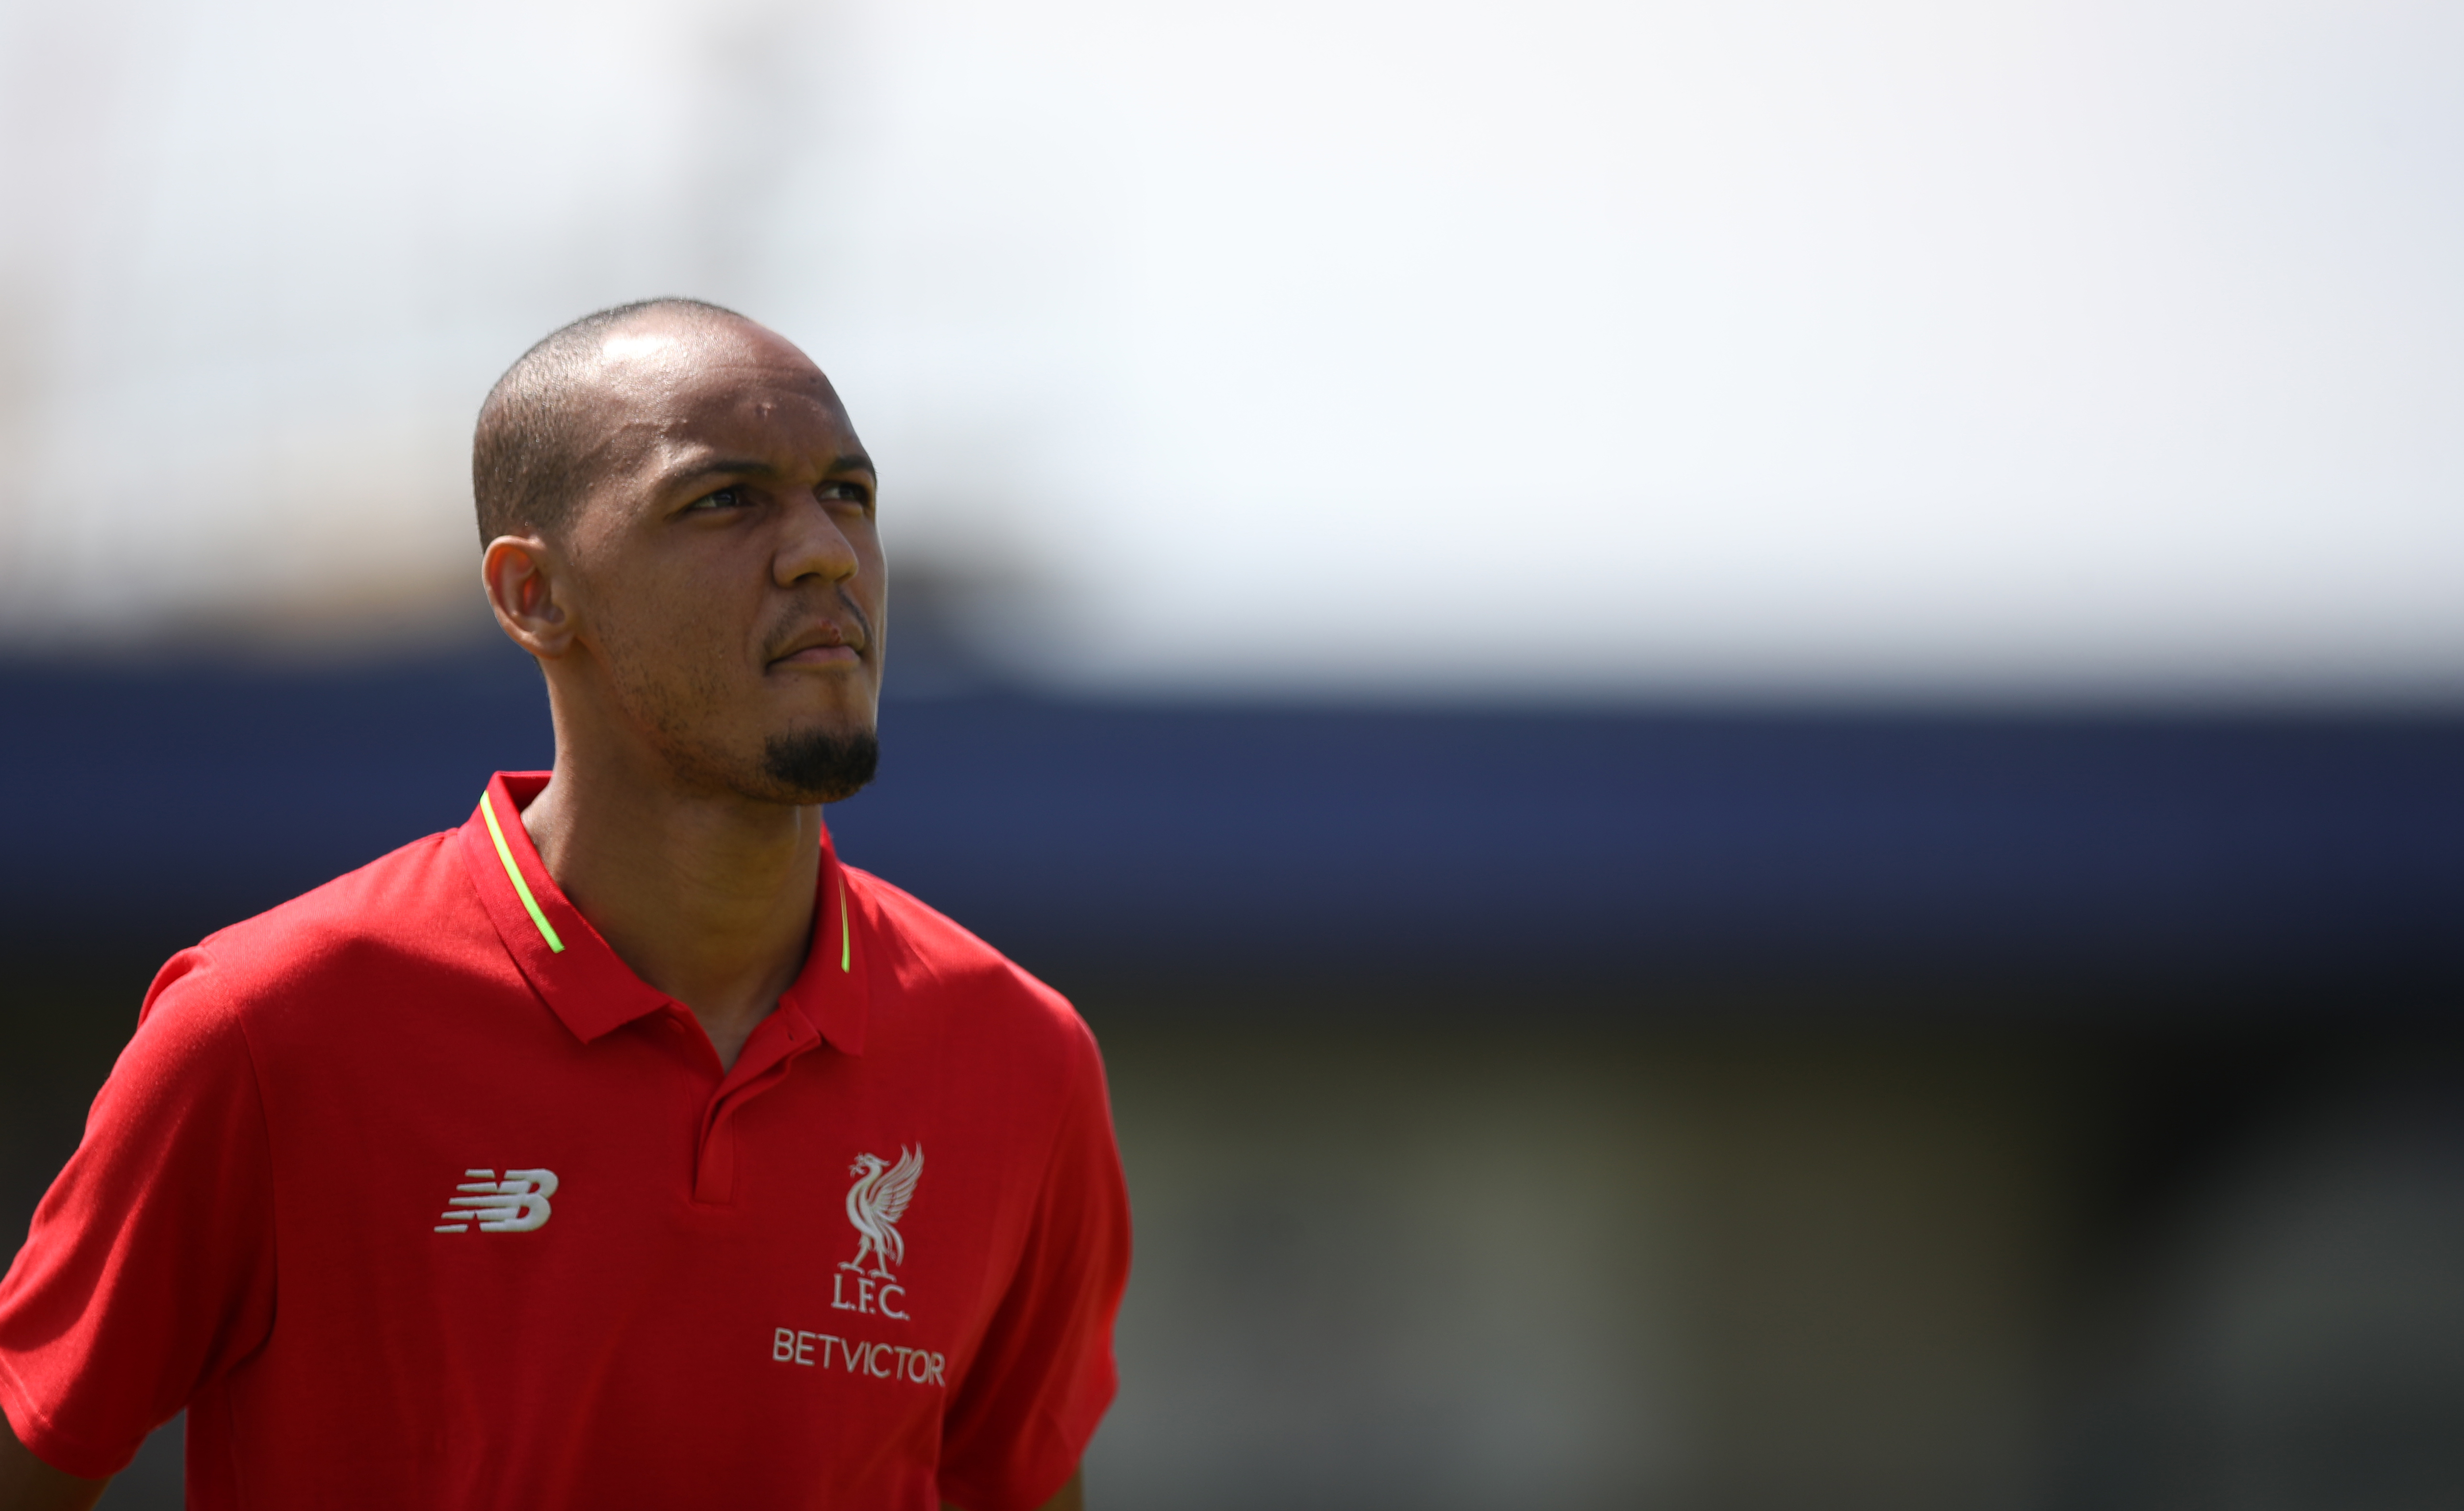 CHESTER, ENGLAND - JULY 07: Fabinho of Liverpool during the Pre-season friendly between Chester FC and Liverpool on July 7, 2018 in Chester, United Kingdom. (Photo by Lynne Cameron/Getty Images)